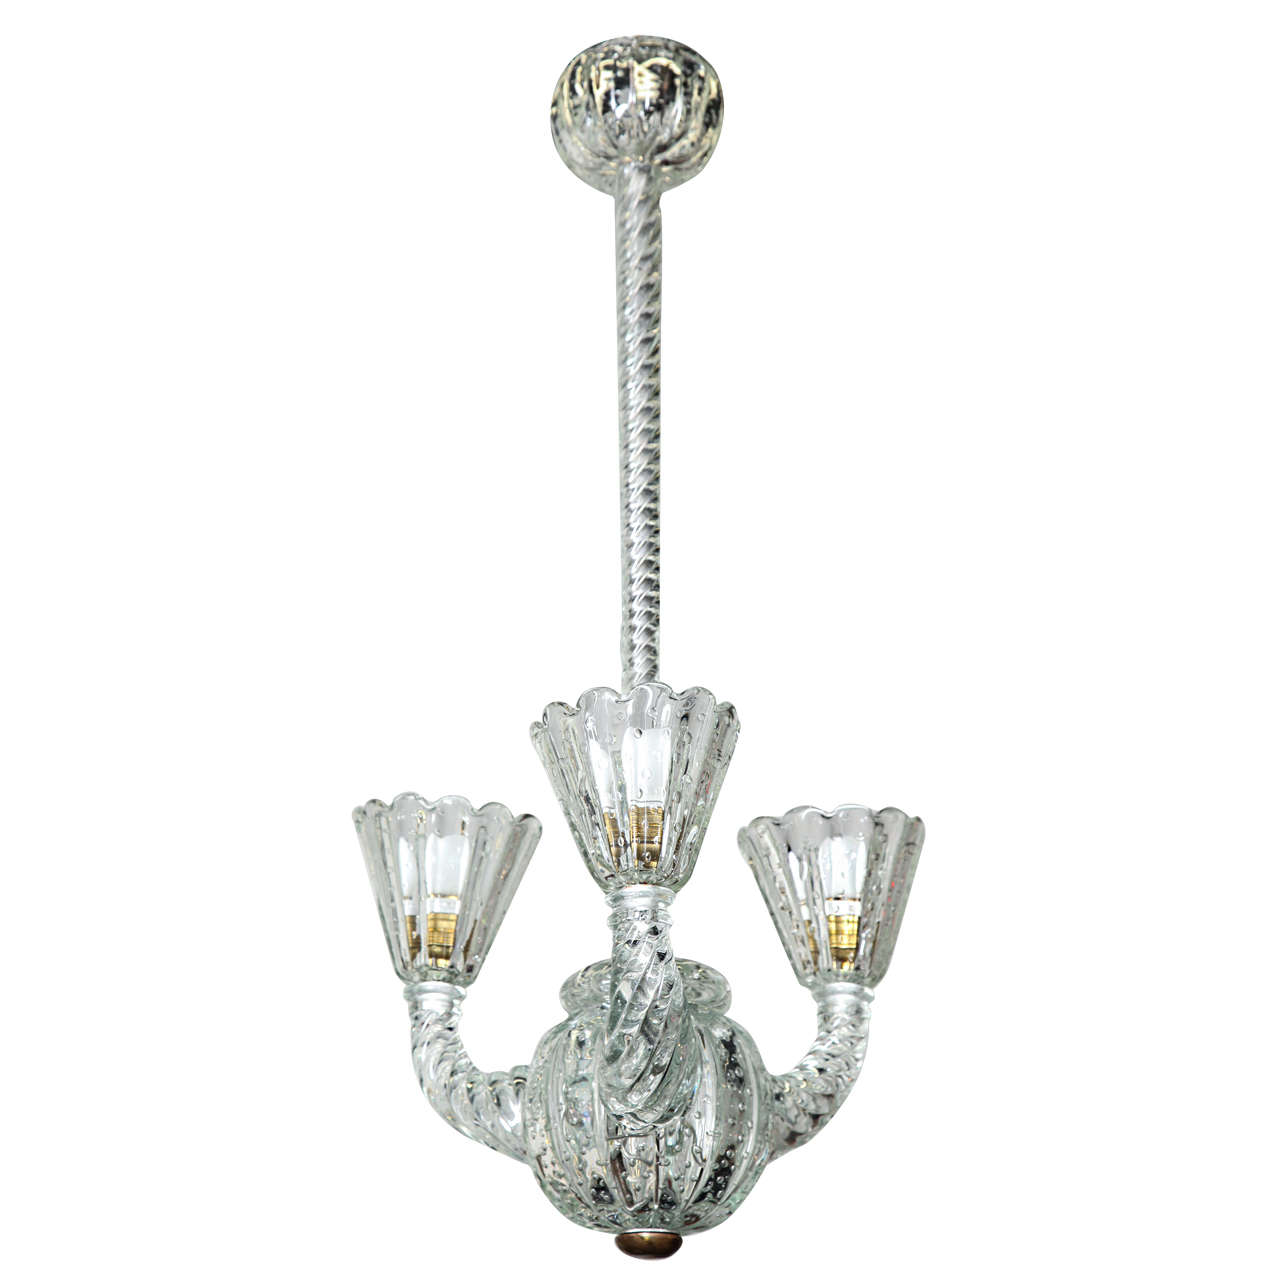 Barovier Toso Chandelier Made in Venice For Sale